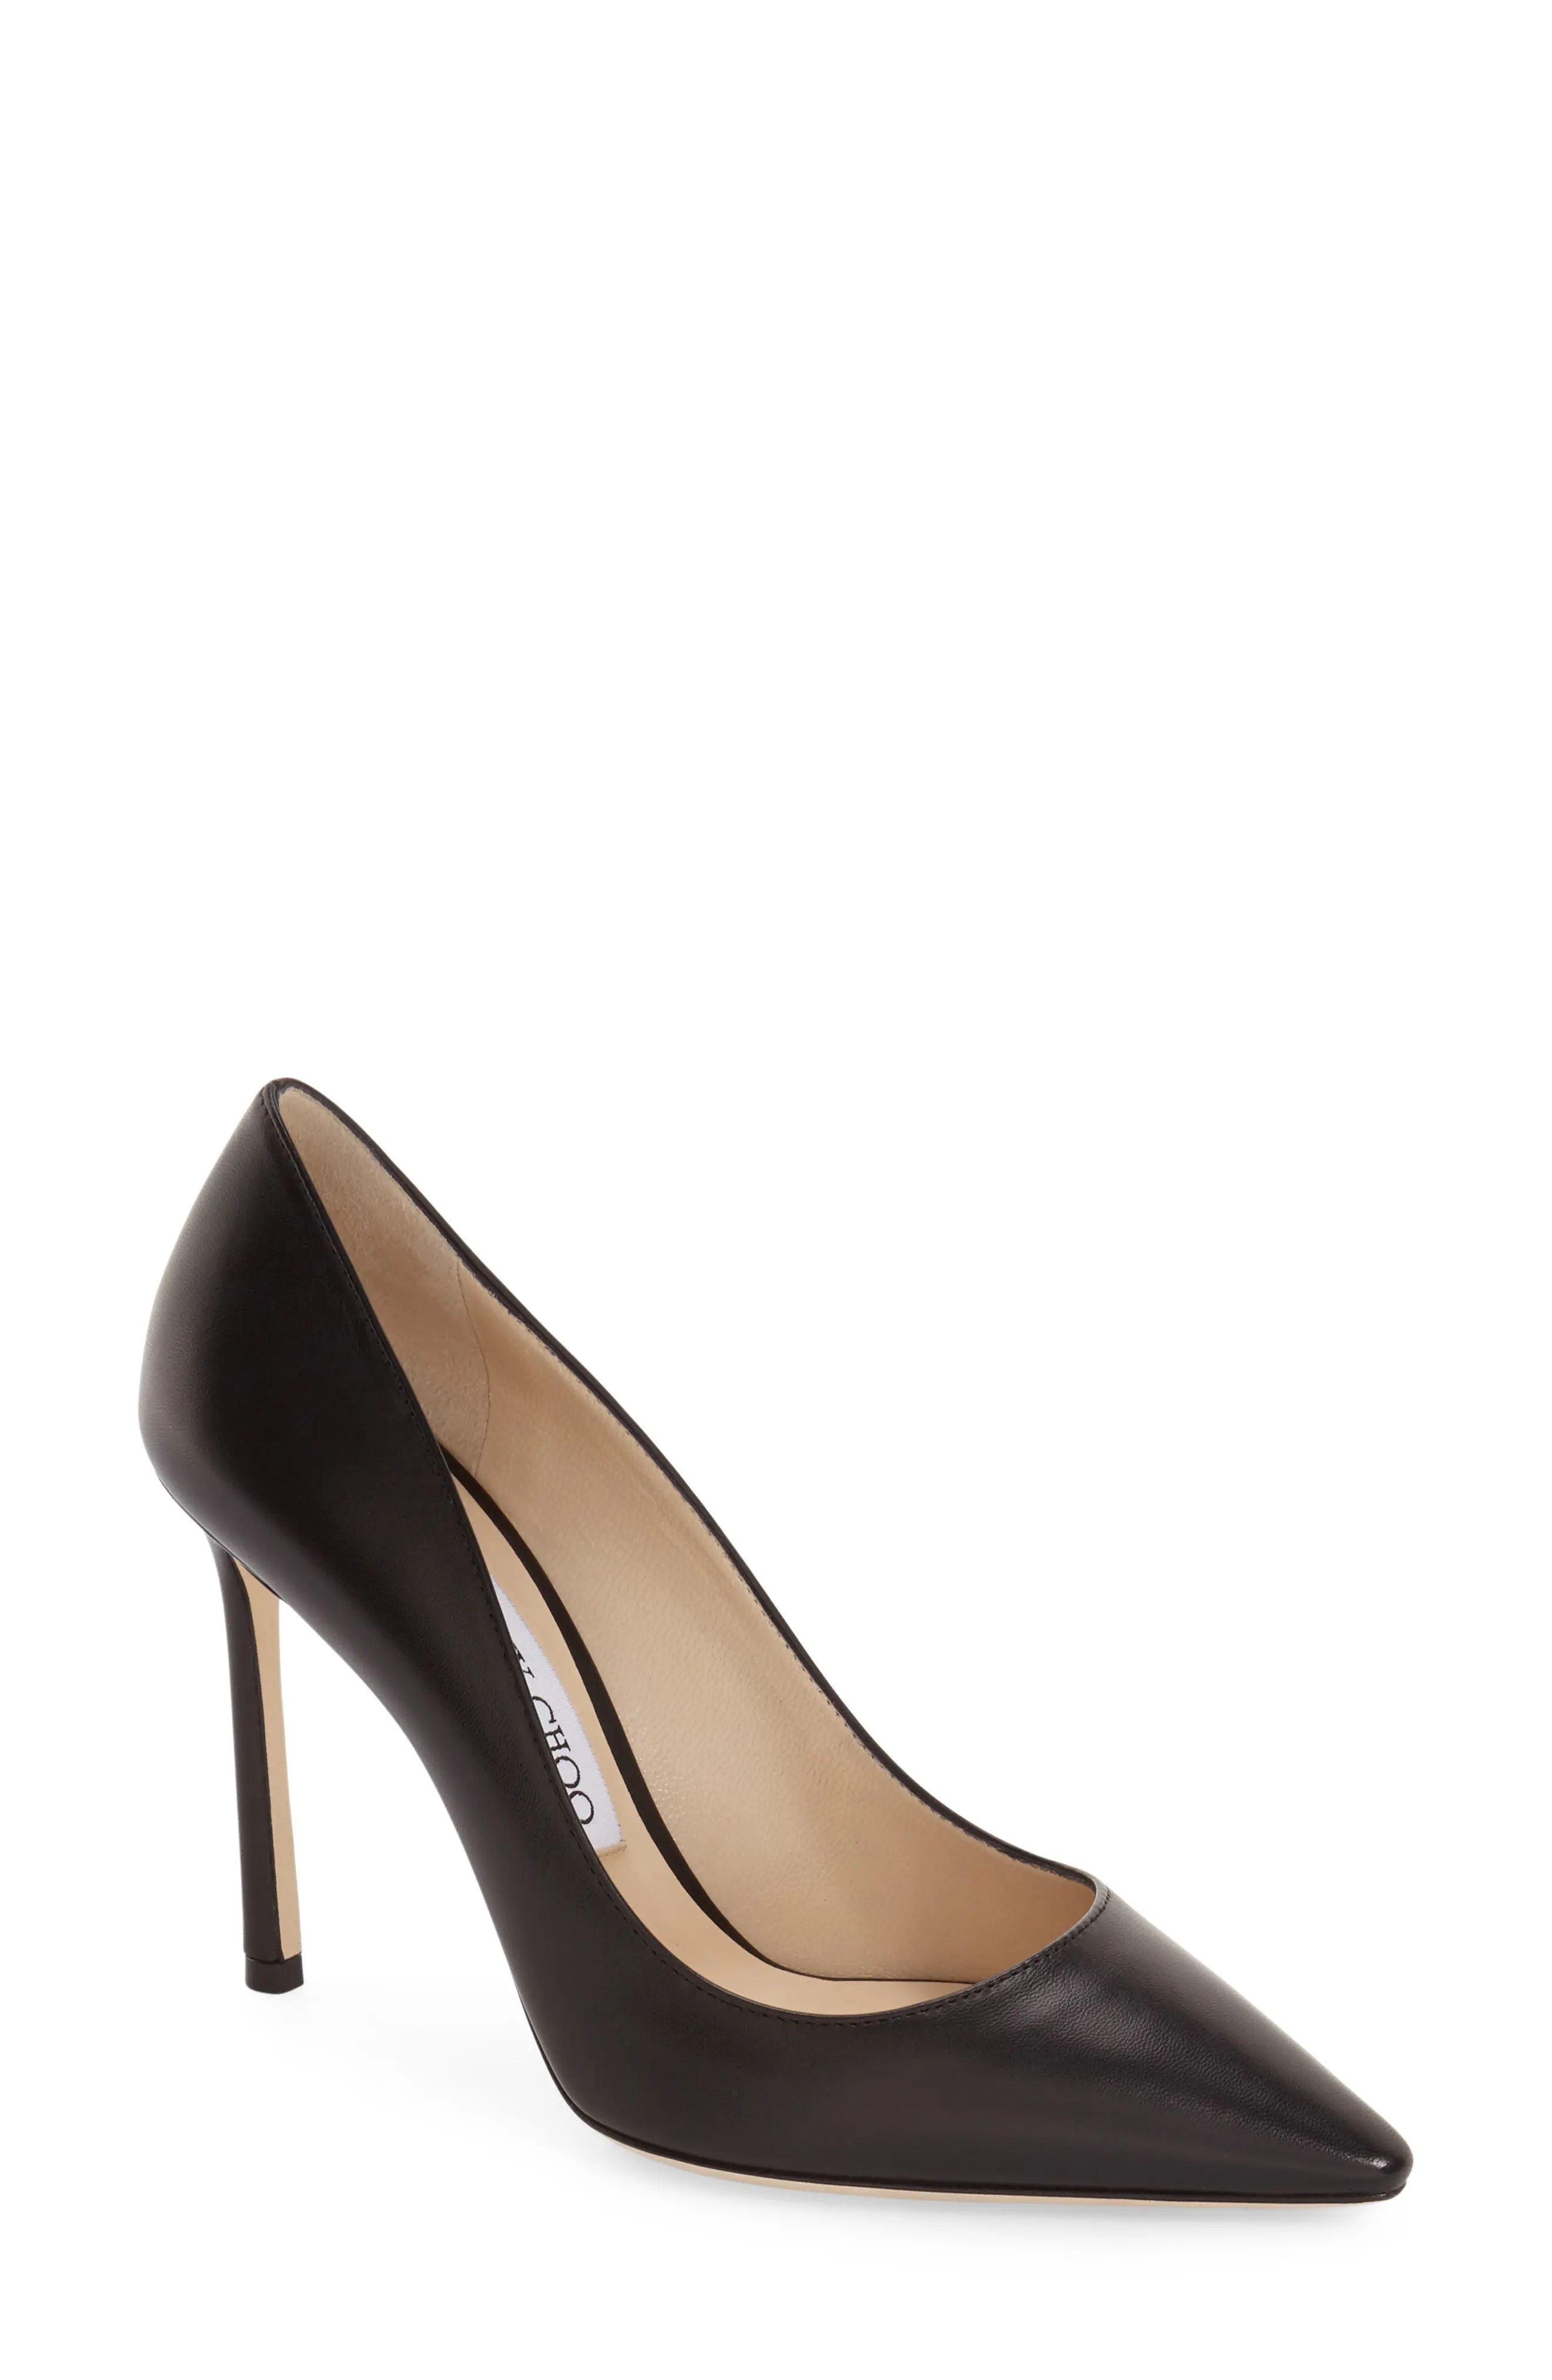 Jimmy Choo Romy Leather Pump in Black Leather at Nordstrom, Size 7Us | Nordstrom